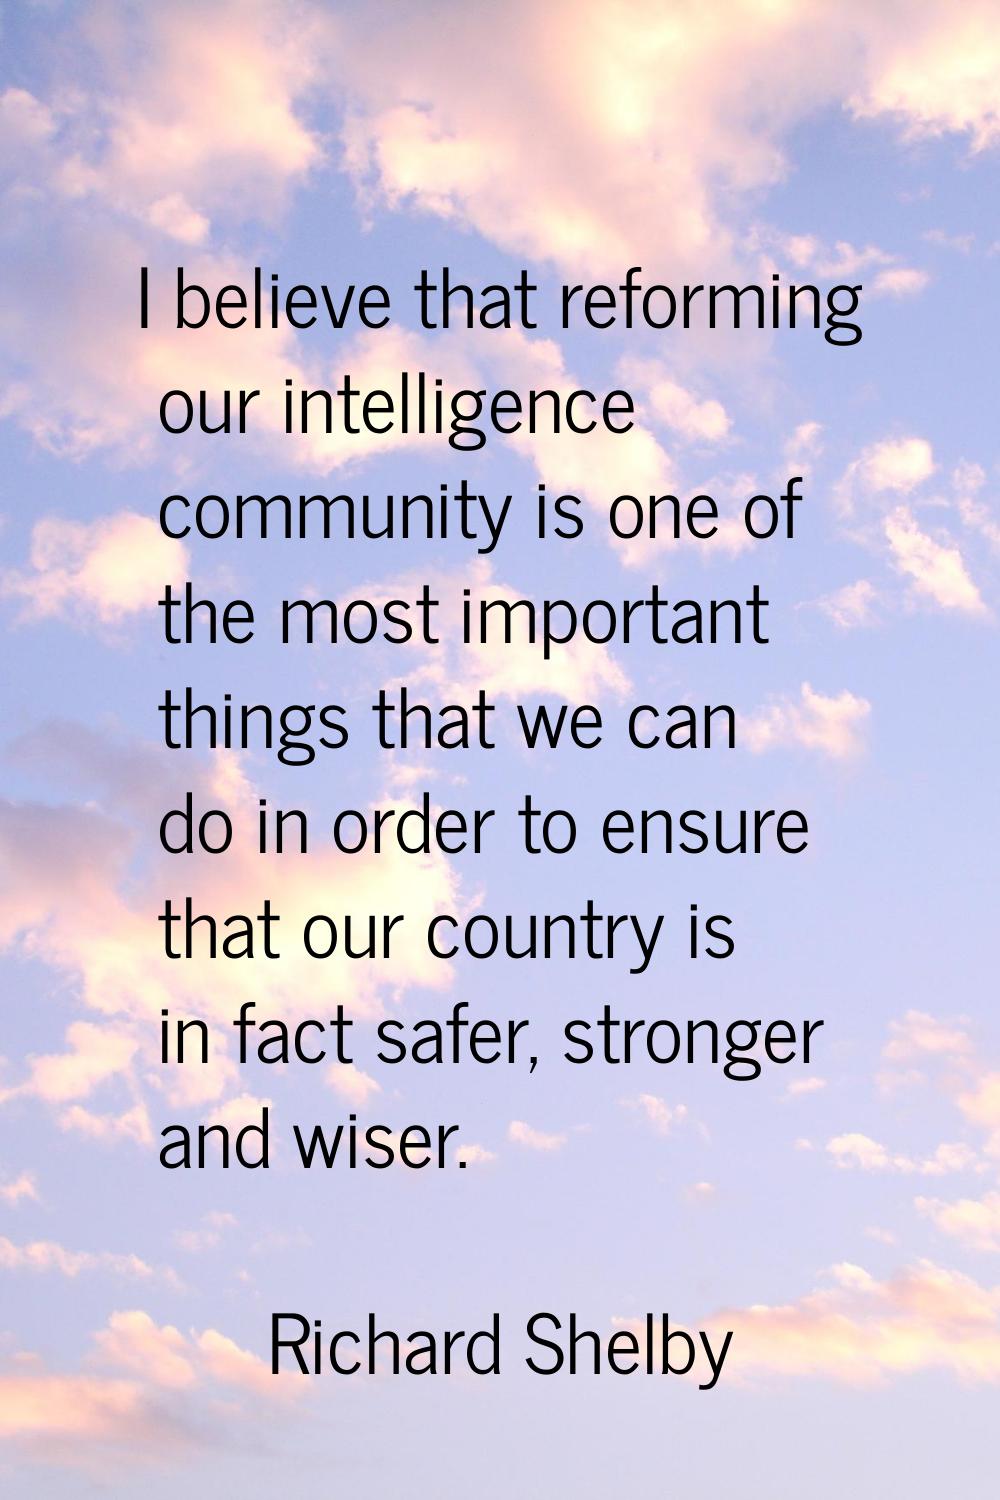 I believe that reforming our intelligence community is one of the most important things that we can